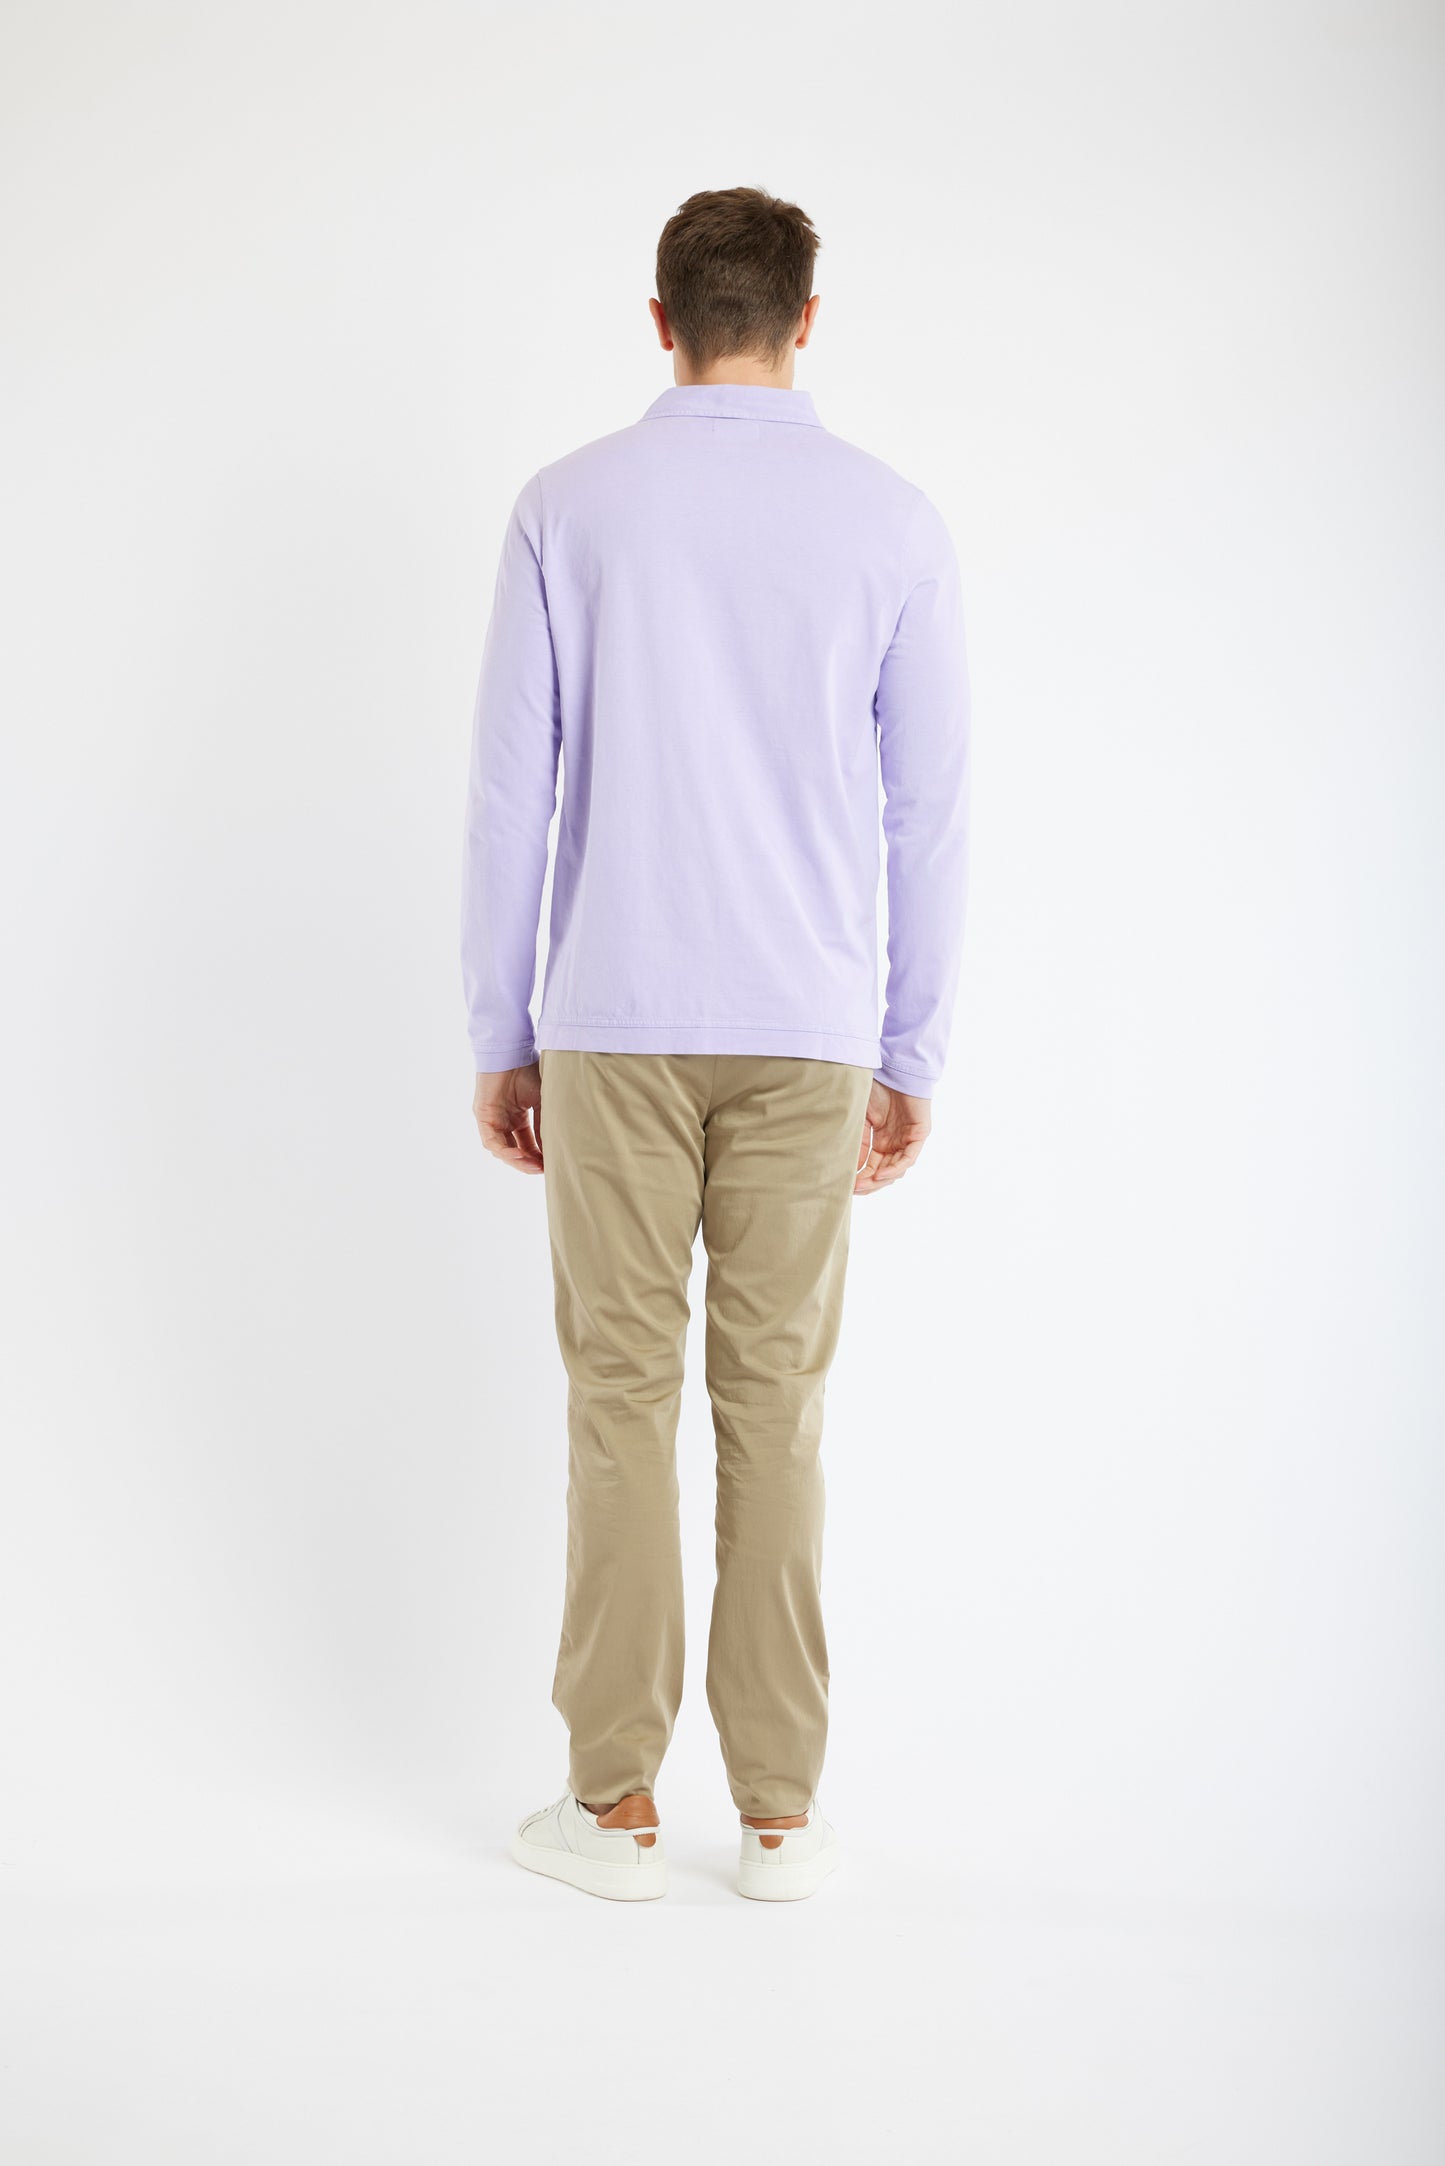 POLO MANCHES LONGUES LILAS